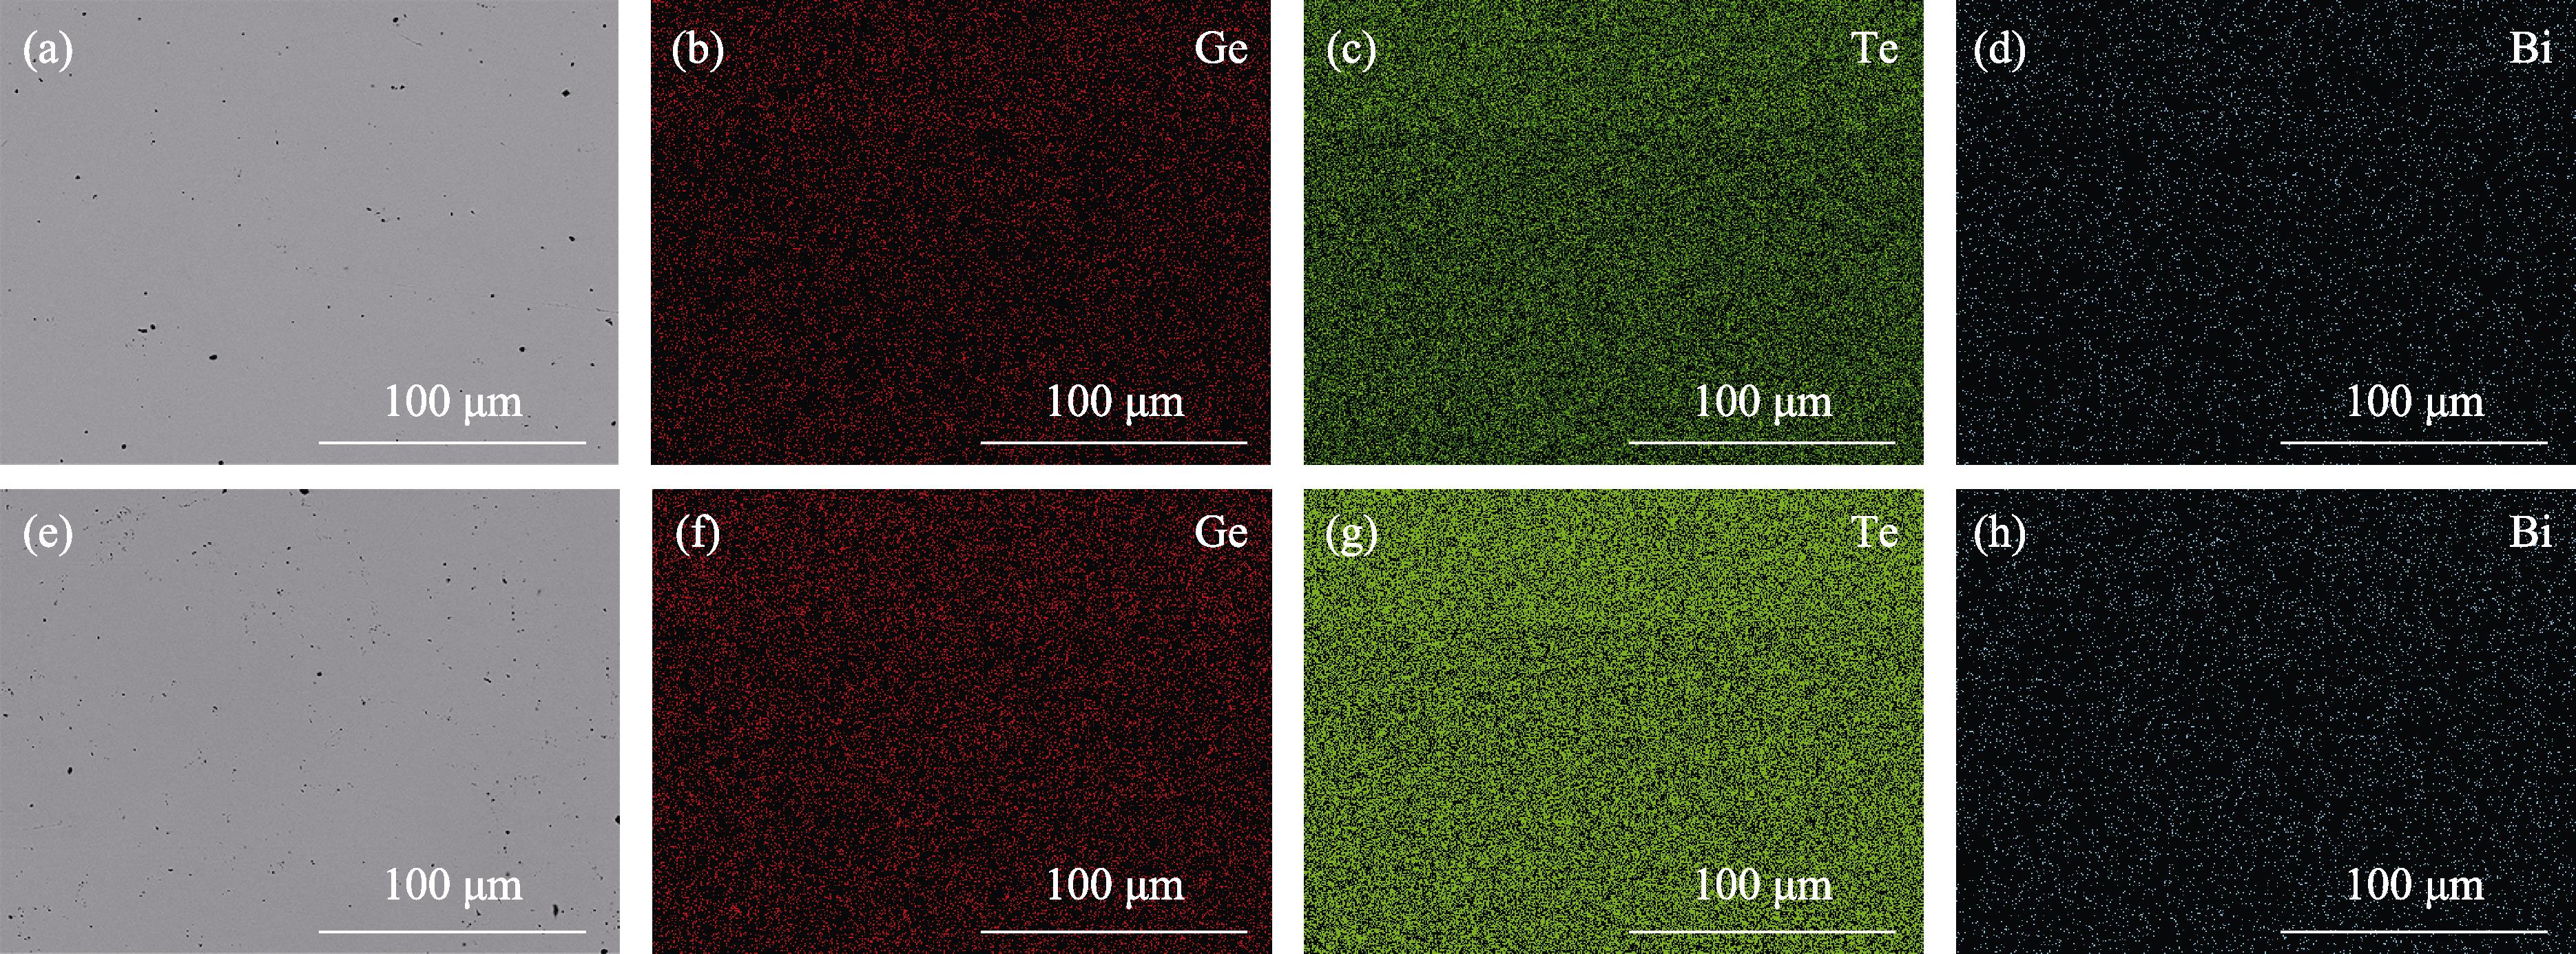 (a, e) Back-scattering electron (BSE) images and (b, f)Ge, (c, g)Te and (d, h) Bi elemental distributions of the polished surfaces for (GeTe)nBi2Te3 samples ((a-d) n=10, (e-h) n=14)